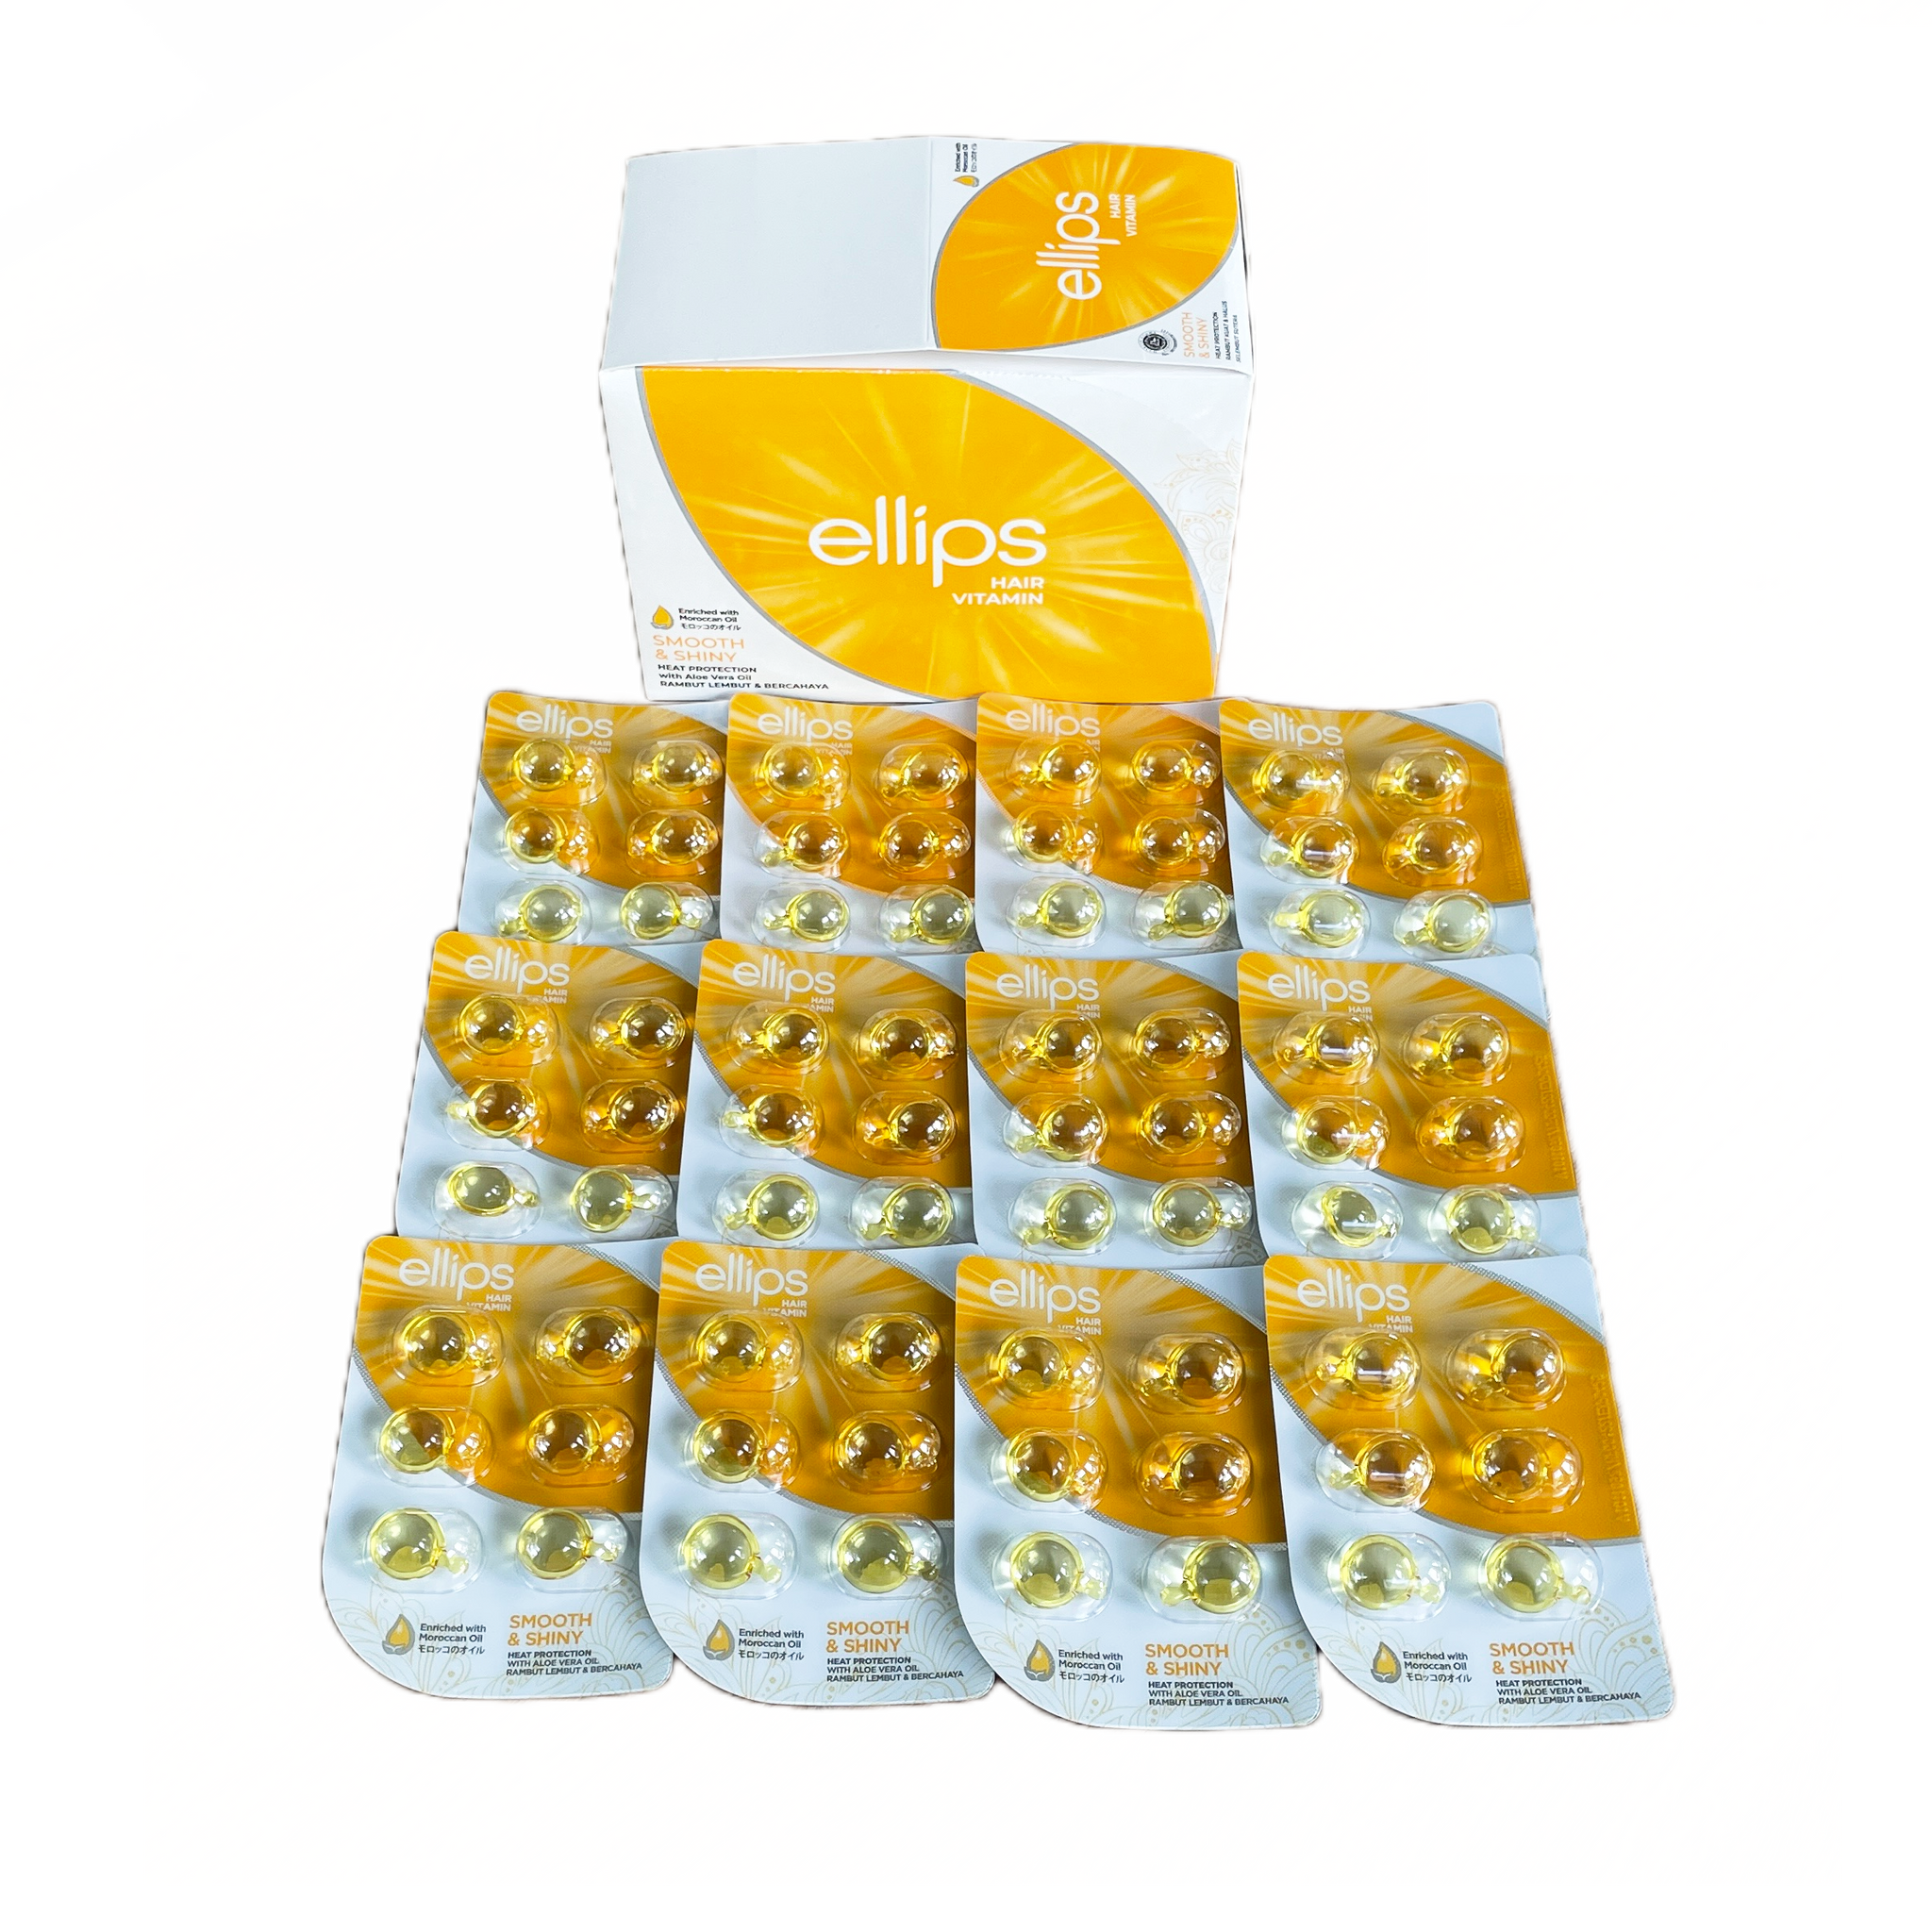 ellips Yellow Smooth & Shiny – box of 72 capsules